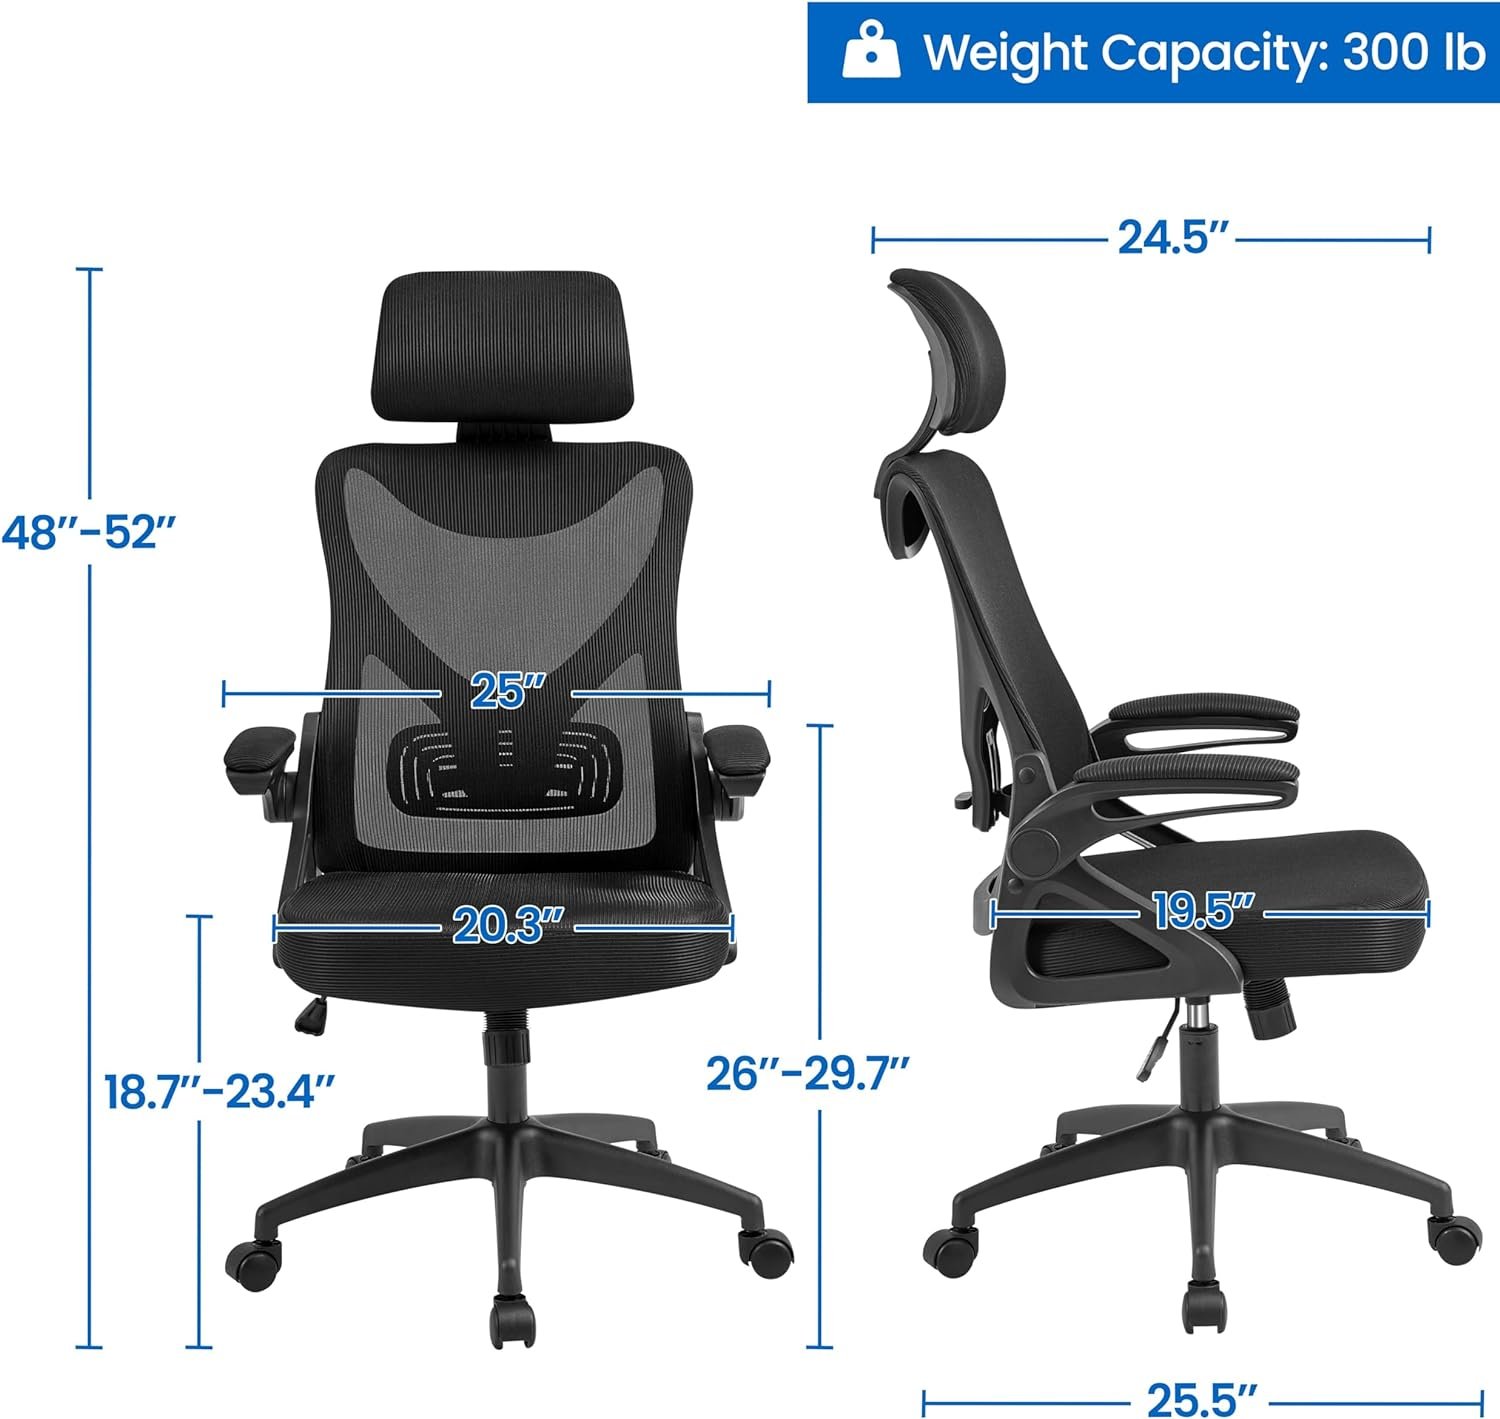 Yaheetech Ergonomic Office Chair, High Back Desk Chair with with flip-up Armrests, Adjustable Padded Headrest Mesh Computer Chair with Lumbar Support for Home Office Meeting Room, Black